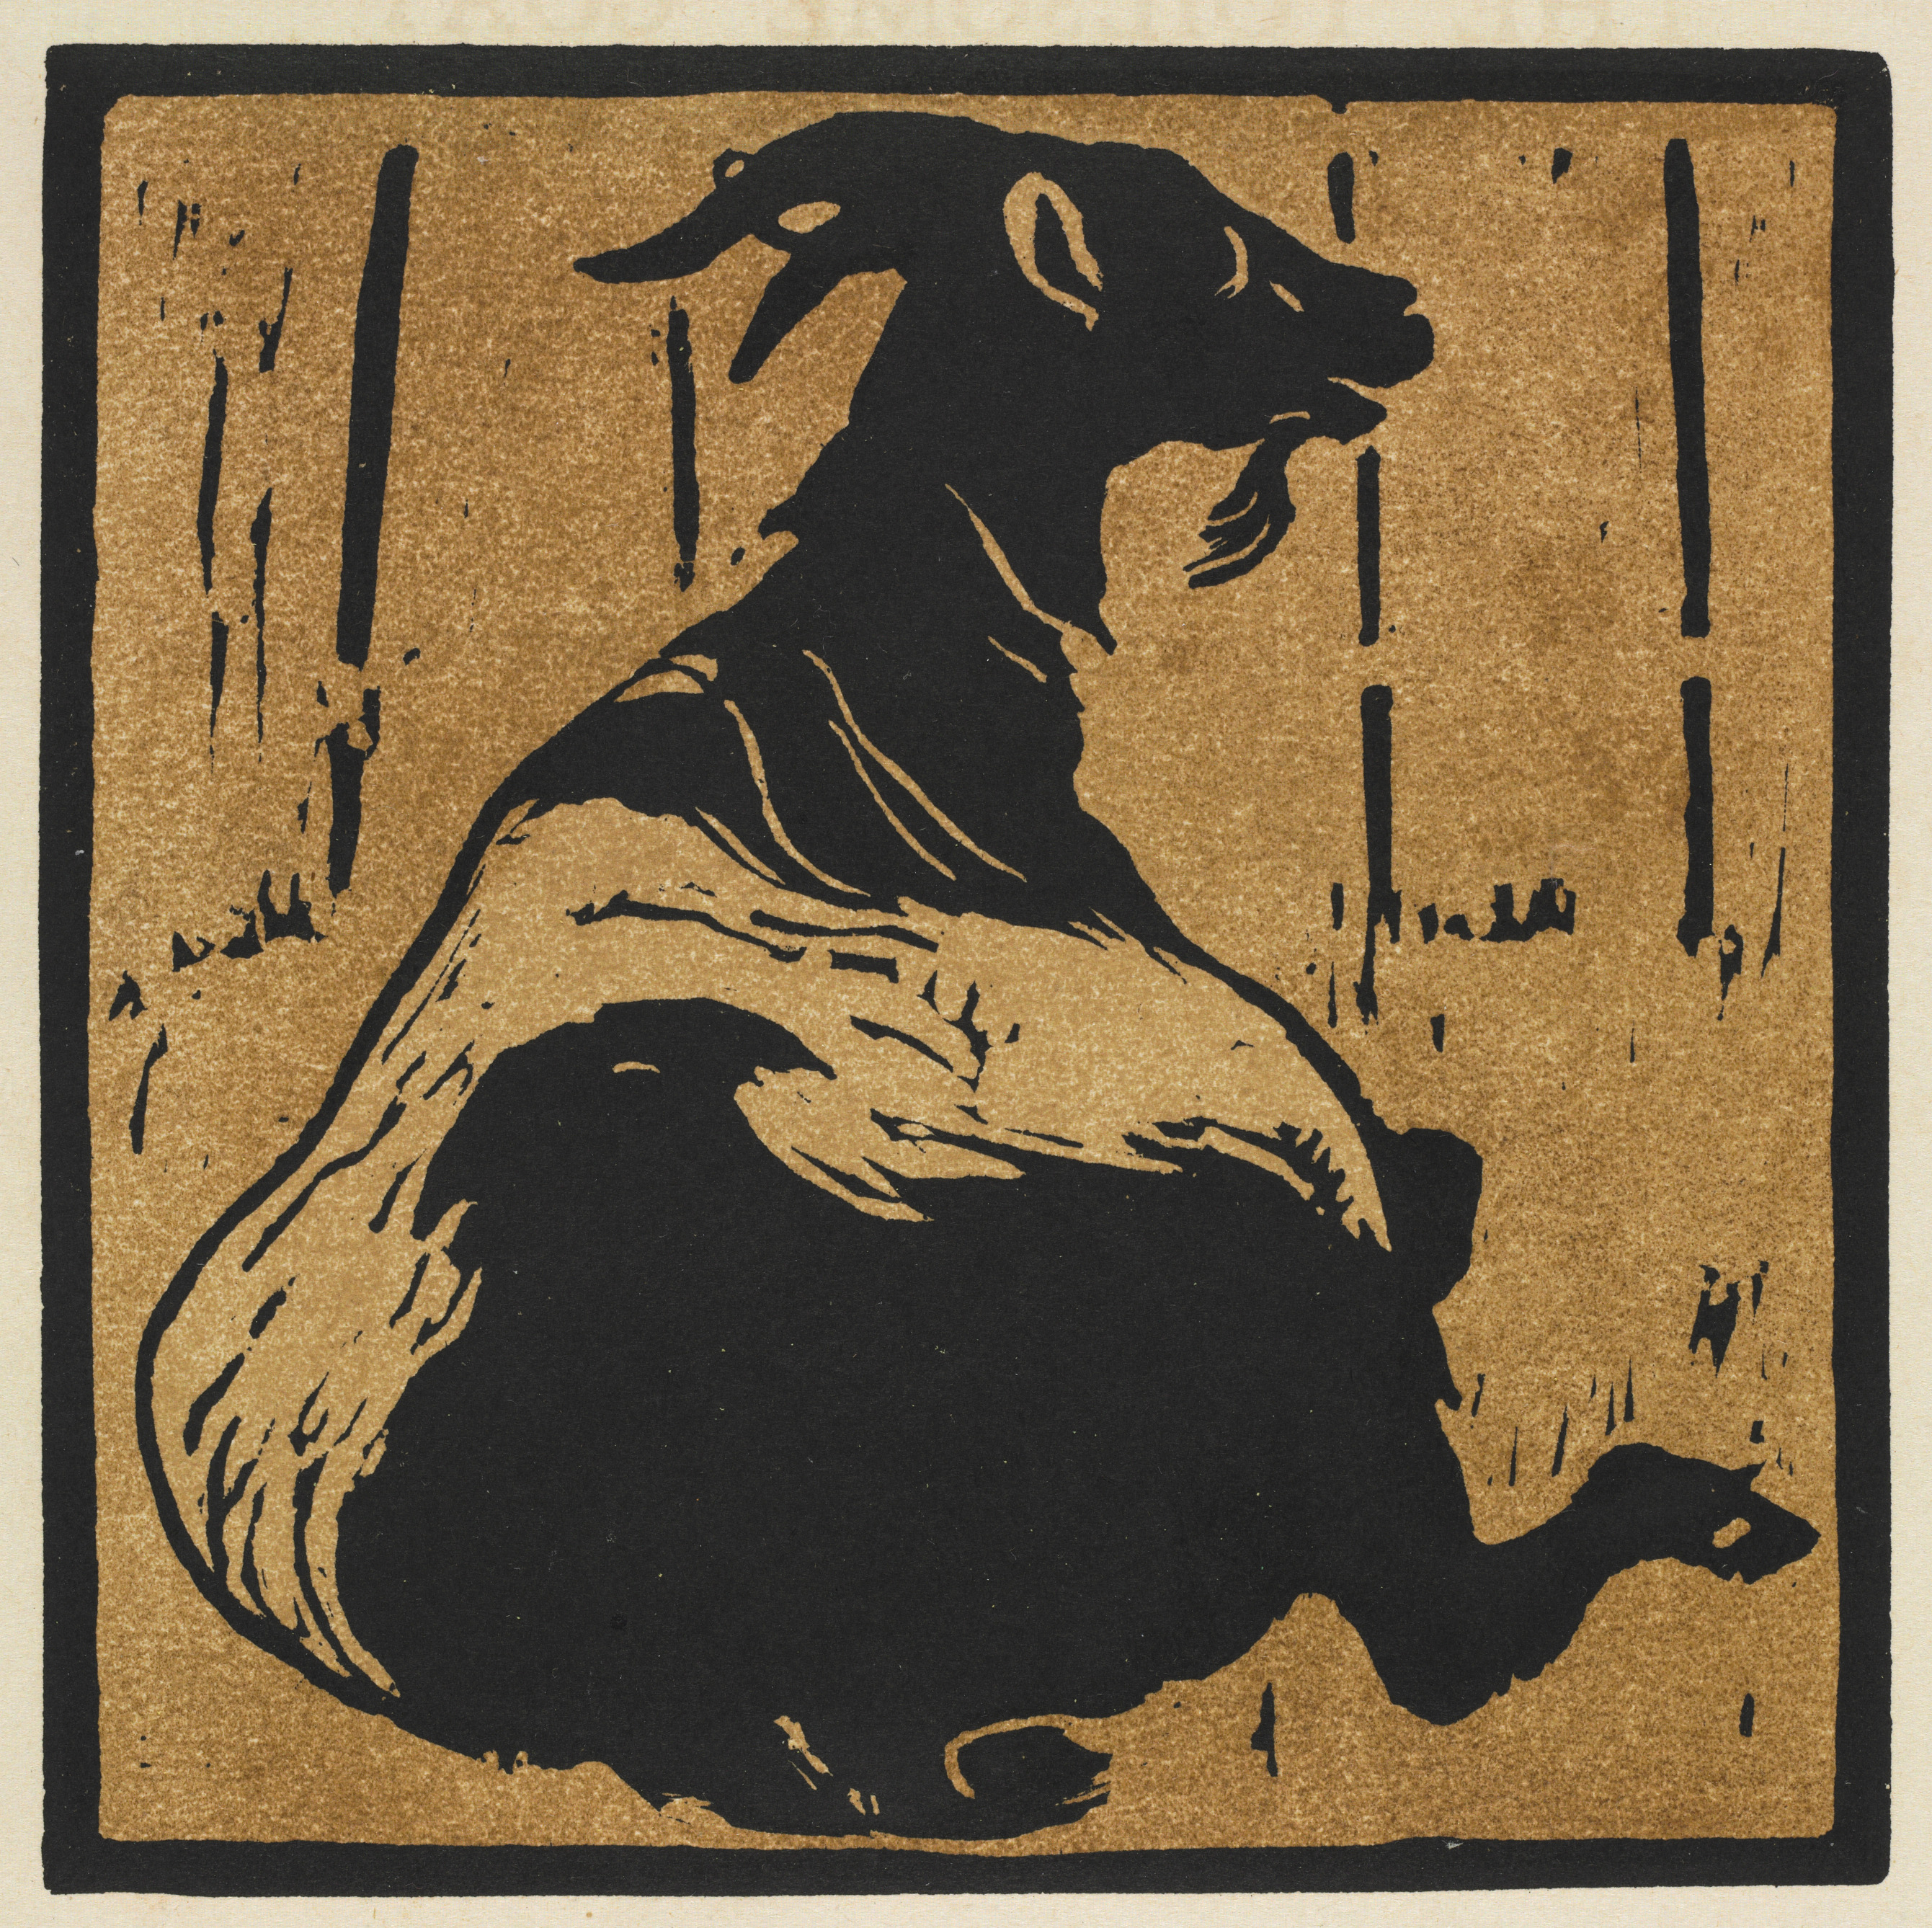 The Square Book of Animals: The Toilsome Goat